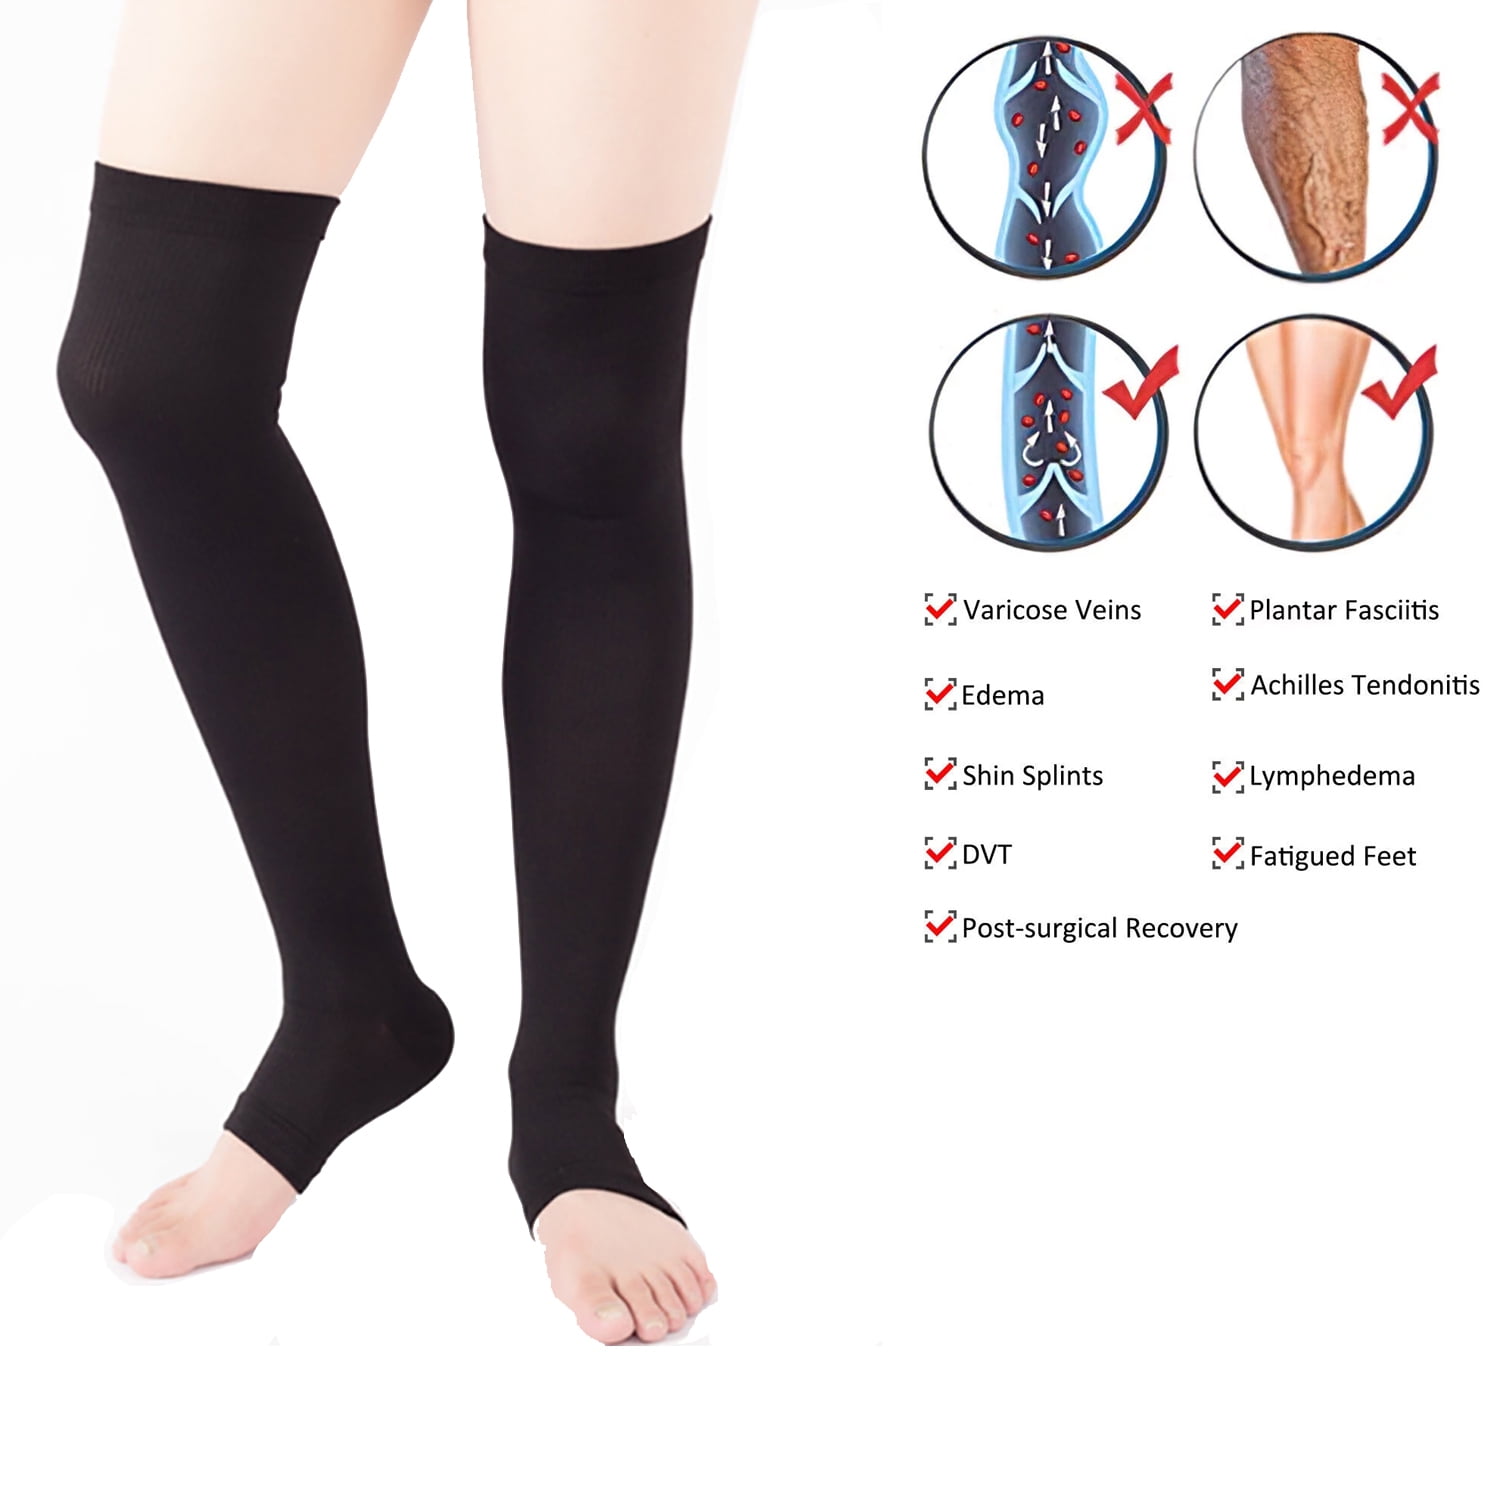 1 Pair High Compression Socks Leg Support Stretch Compression Socks Knee  High Stockings Open Toe Socks for Men Women, Anti Fatigue Pain Relief,  Helps Circulation, Varicose Veins 